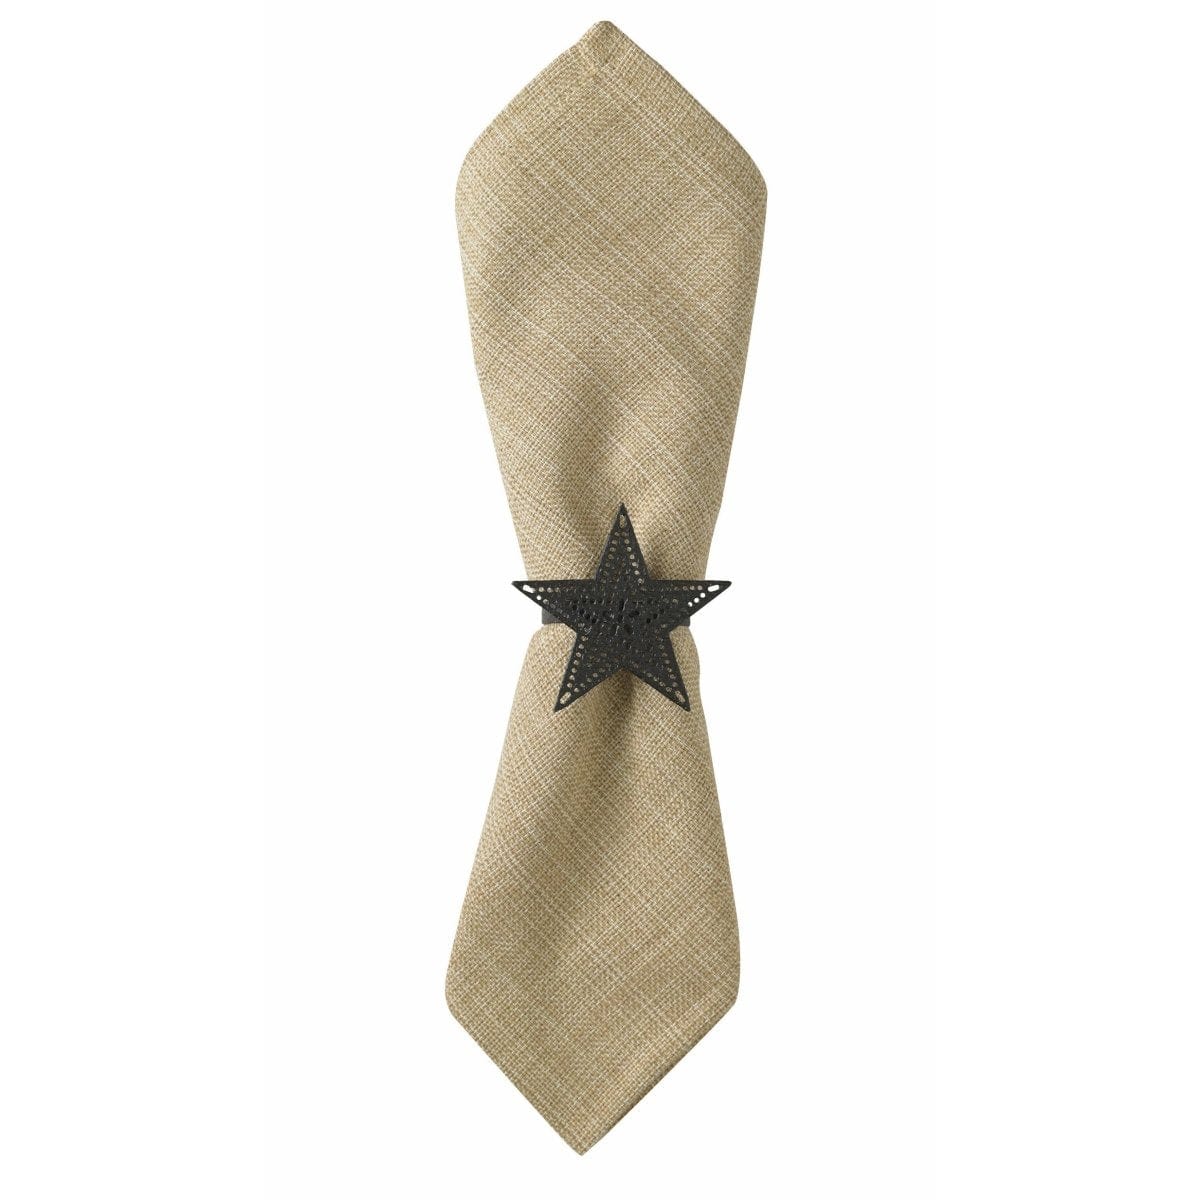 Punched Tin Star In Black Napkin Ring-Park Designs-The Village Merchant